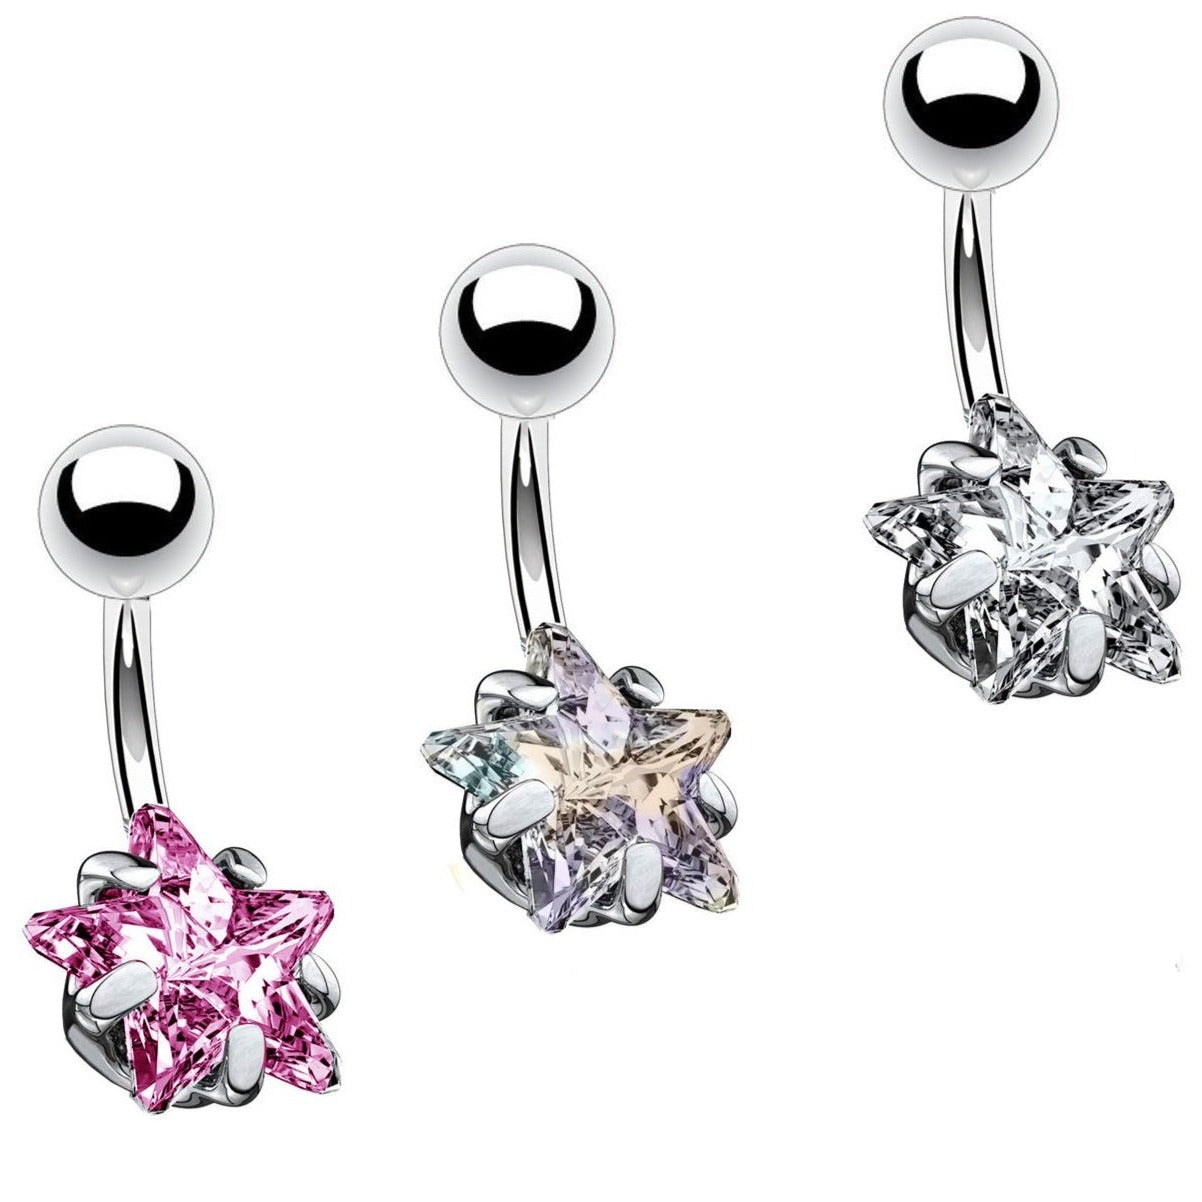 Prong Set Star CZ Belly Ring